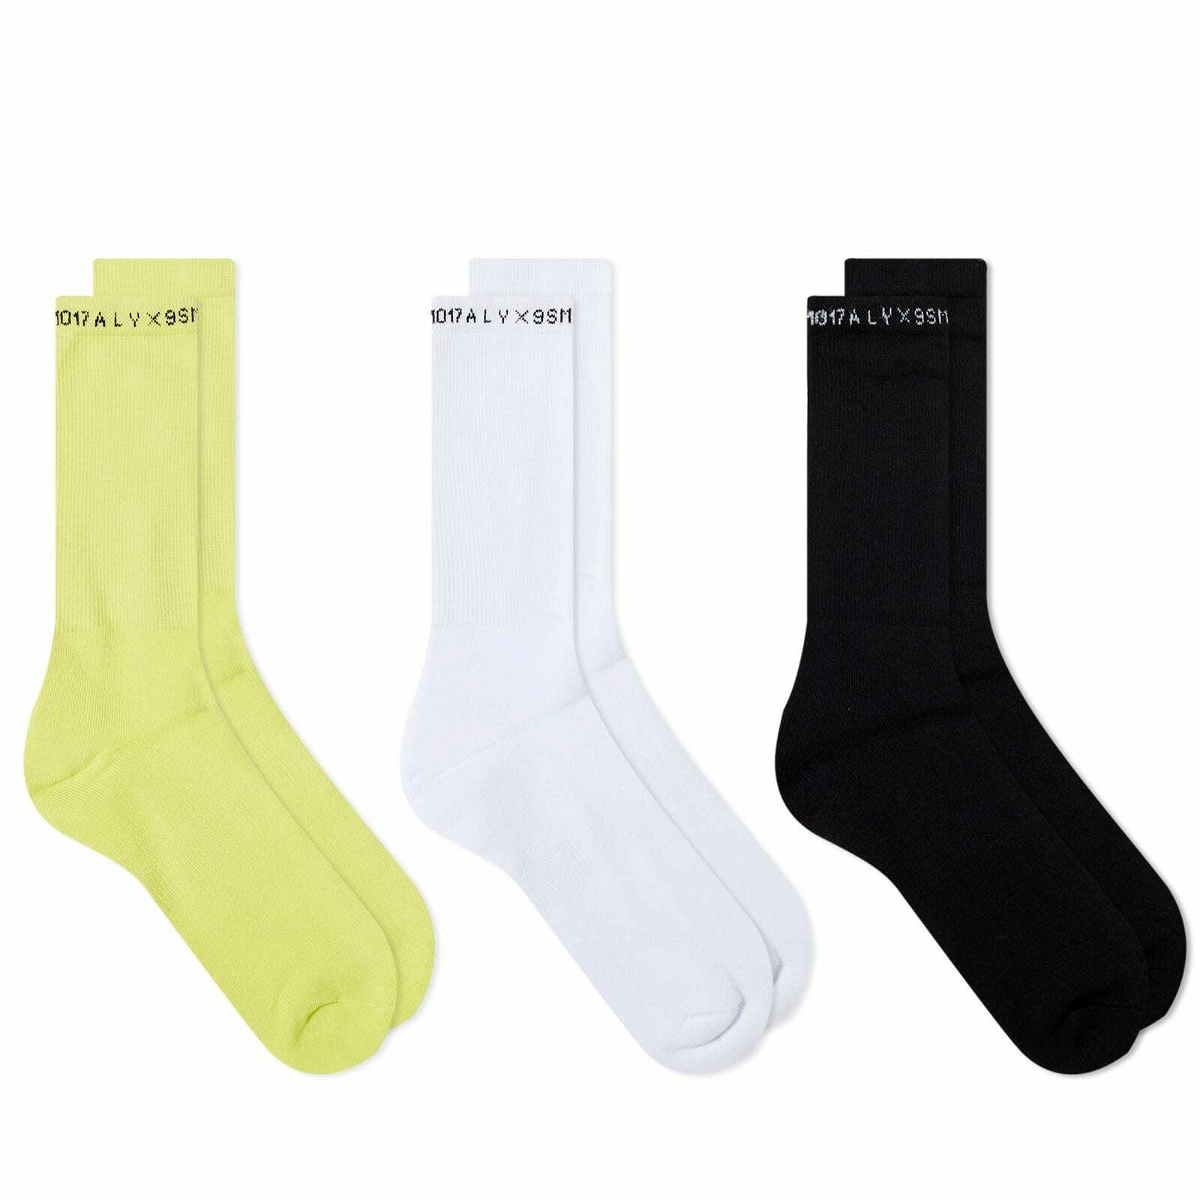 Photo: 1017 ALYX 9SM Women's 3 Pack Socks in Black/White/Neon Washed Yellow